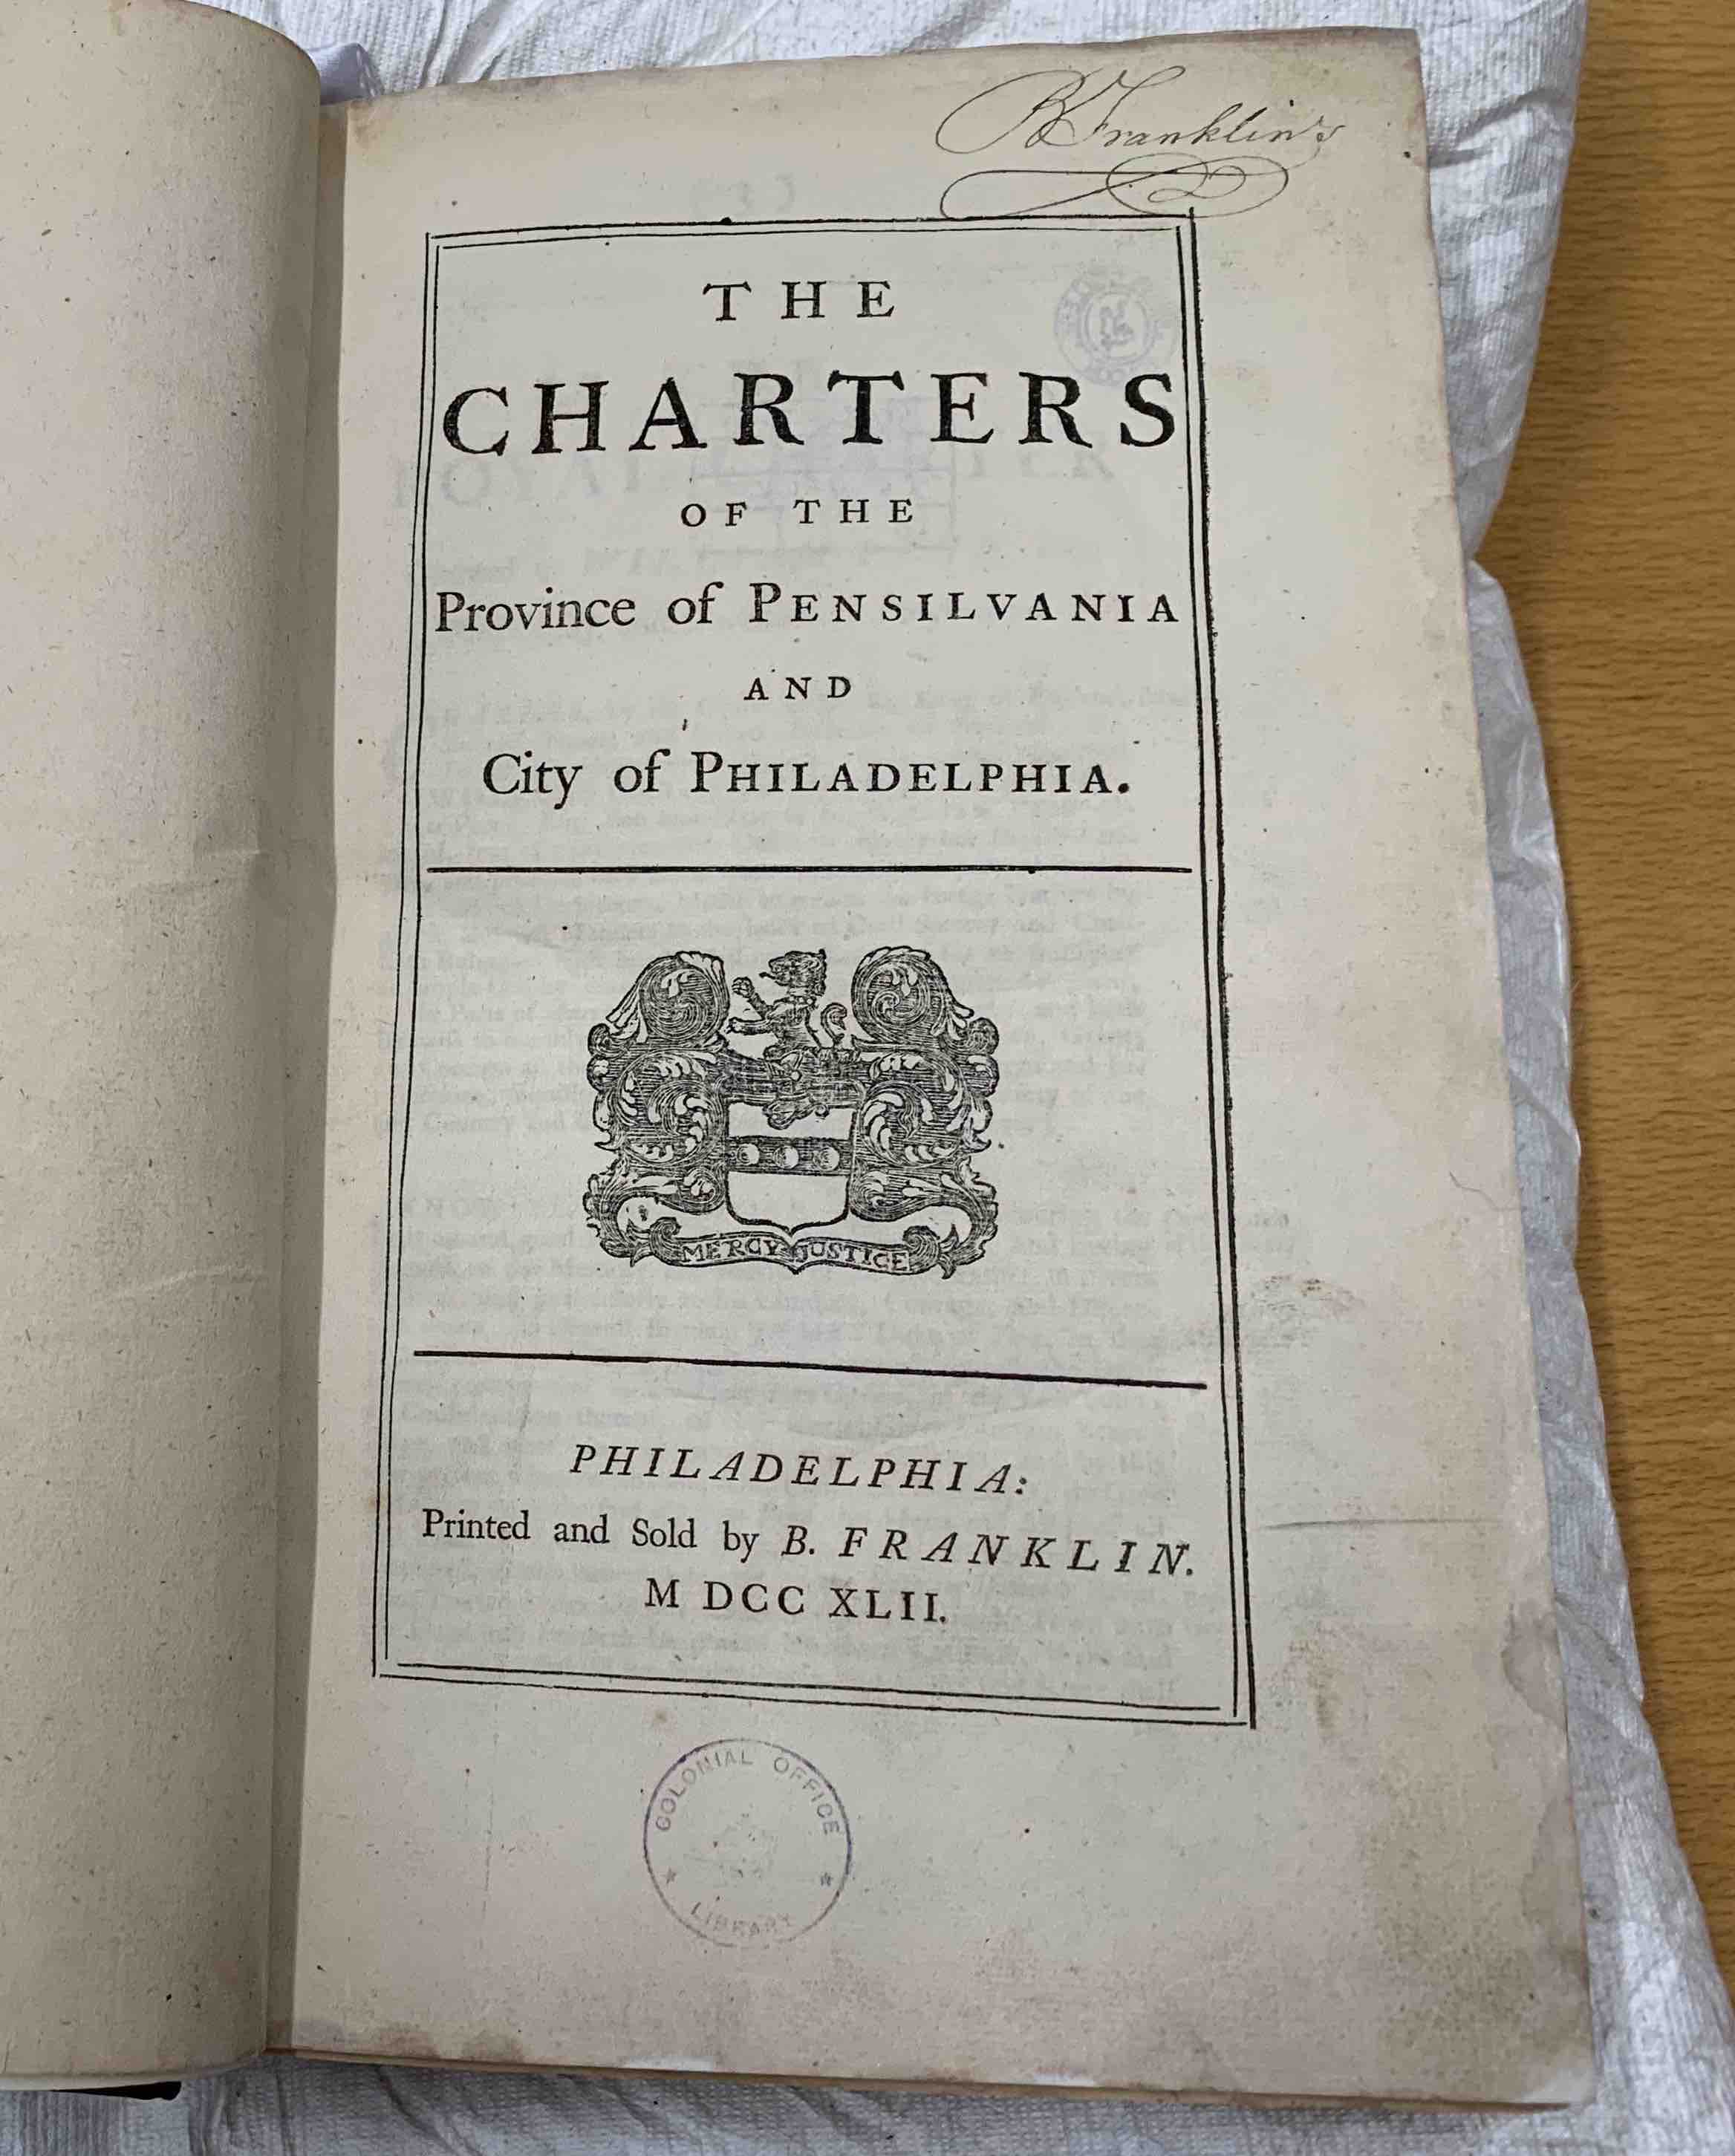 Title page of The Charters of the Province of Pensilvania and City of Philadelphia. Signed in upper right corner by B. Franklin.